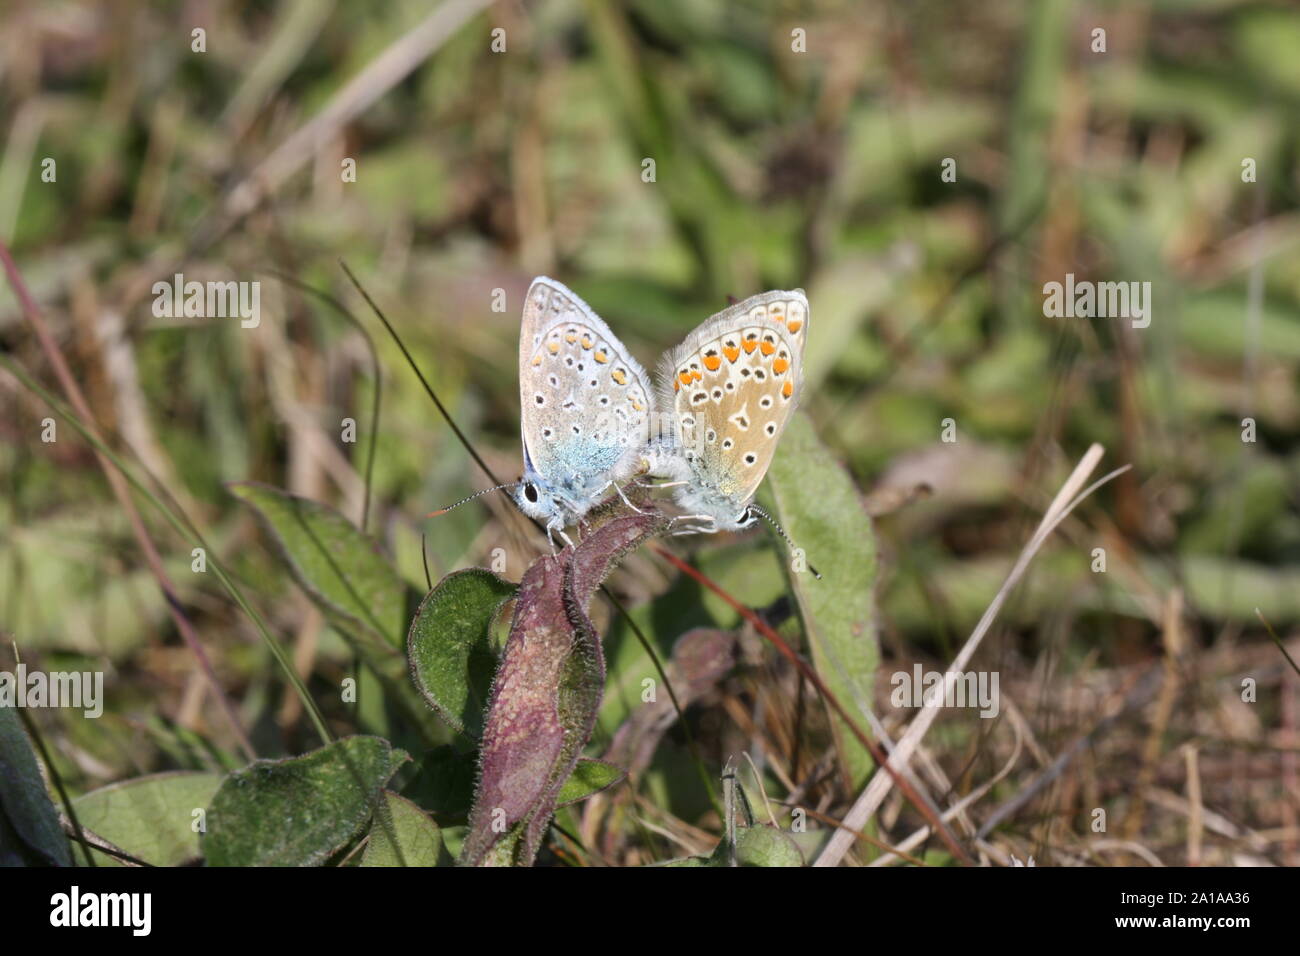 Two Baton Blue Butterflies Mating in Autumn Stock Photo